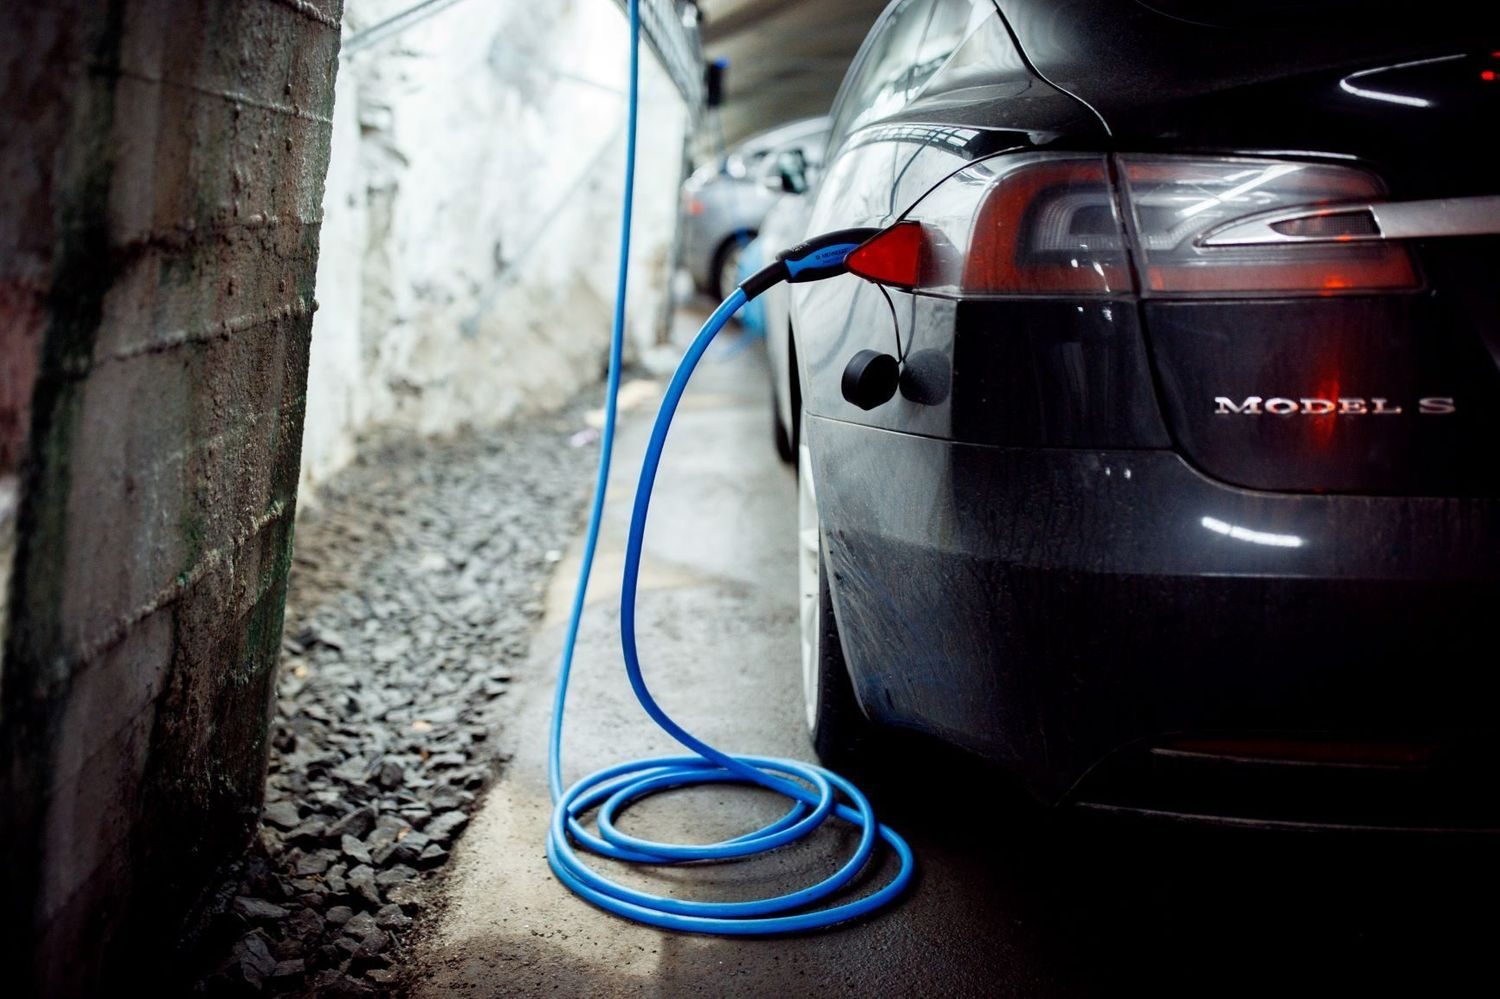 Oslo's climate strategy: electric vehicles